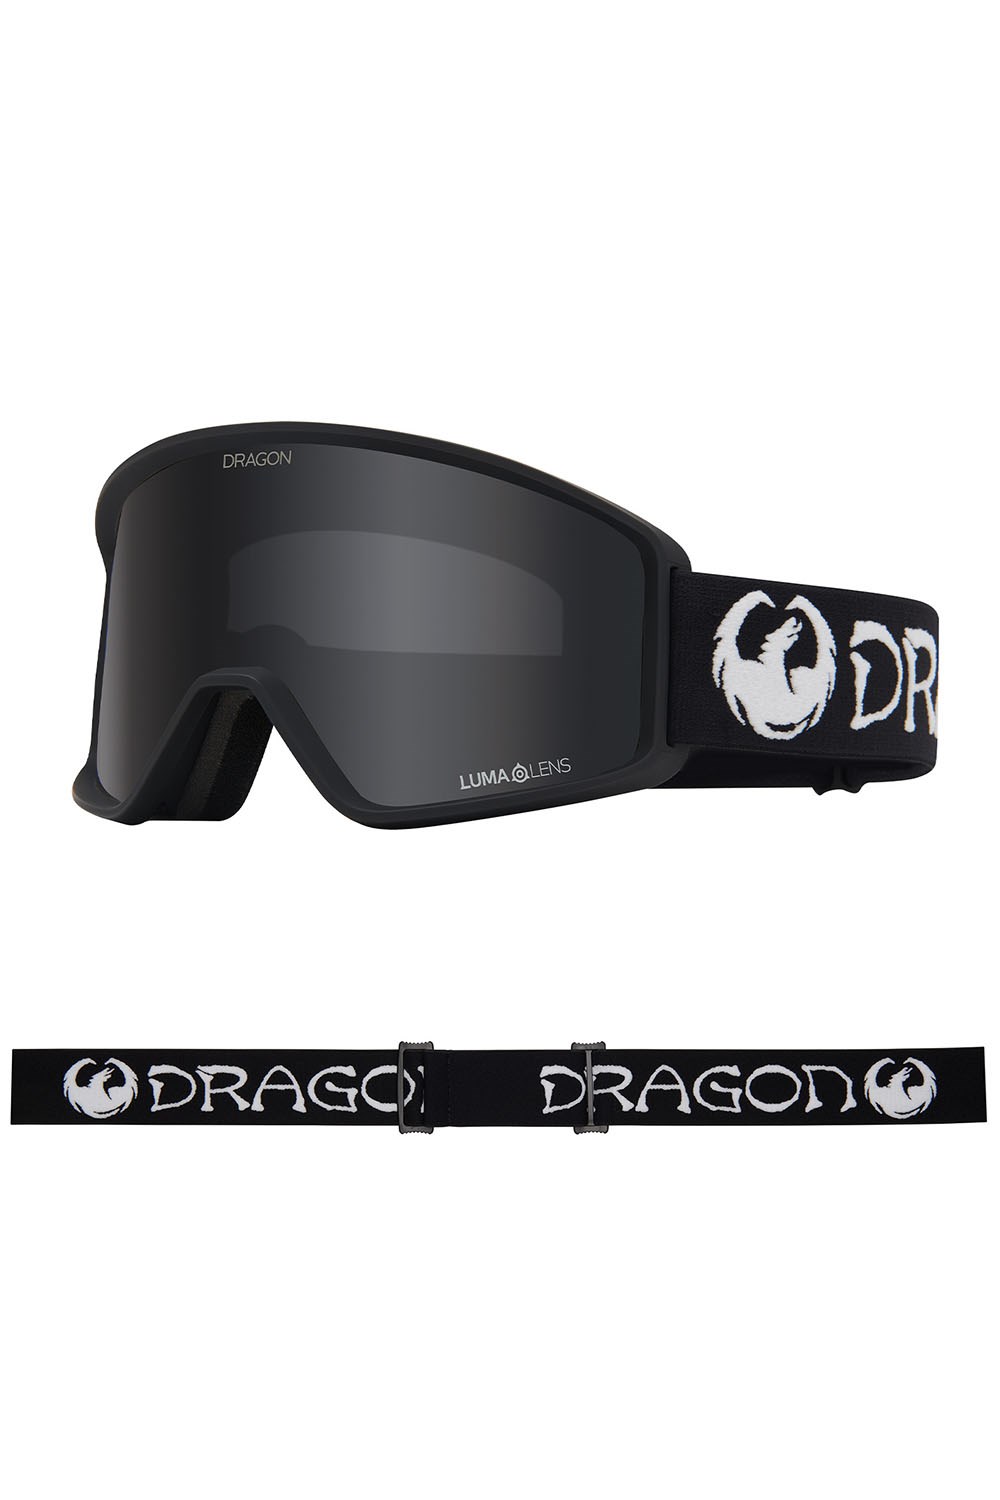 DXT OTG Youth Snow Goggles for Ages 10-15 -